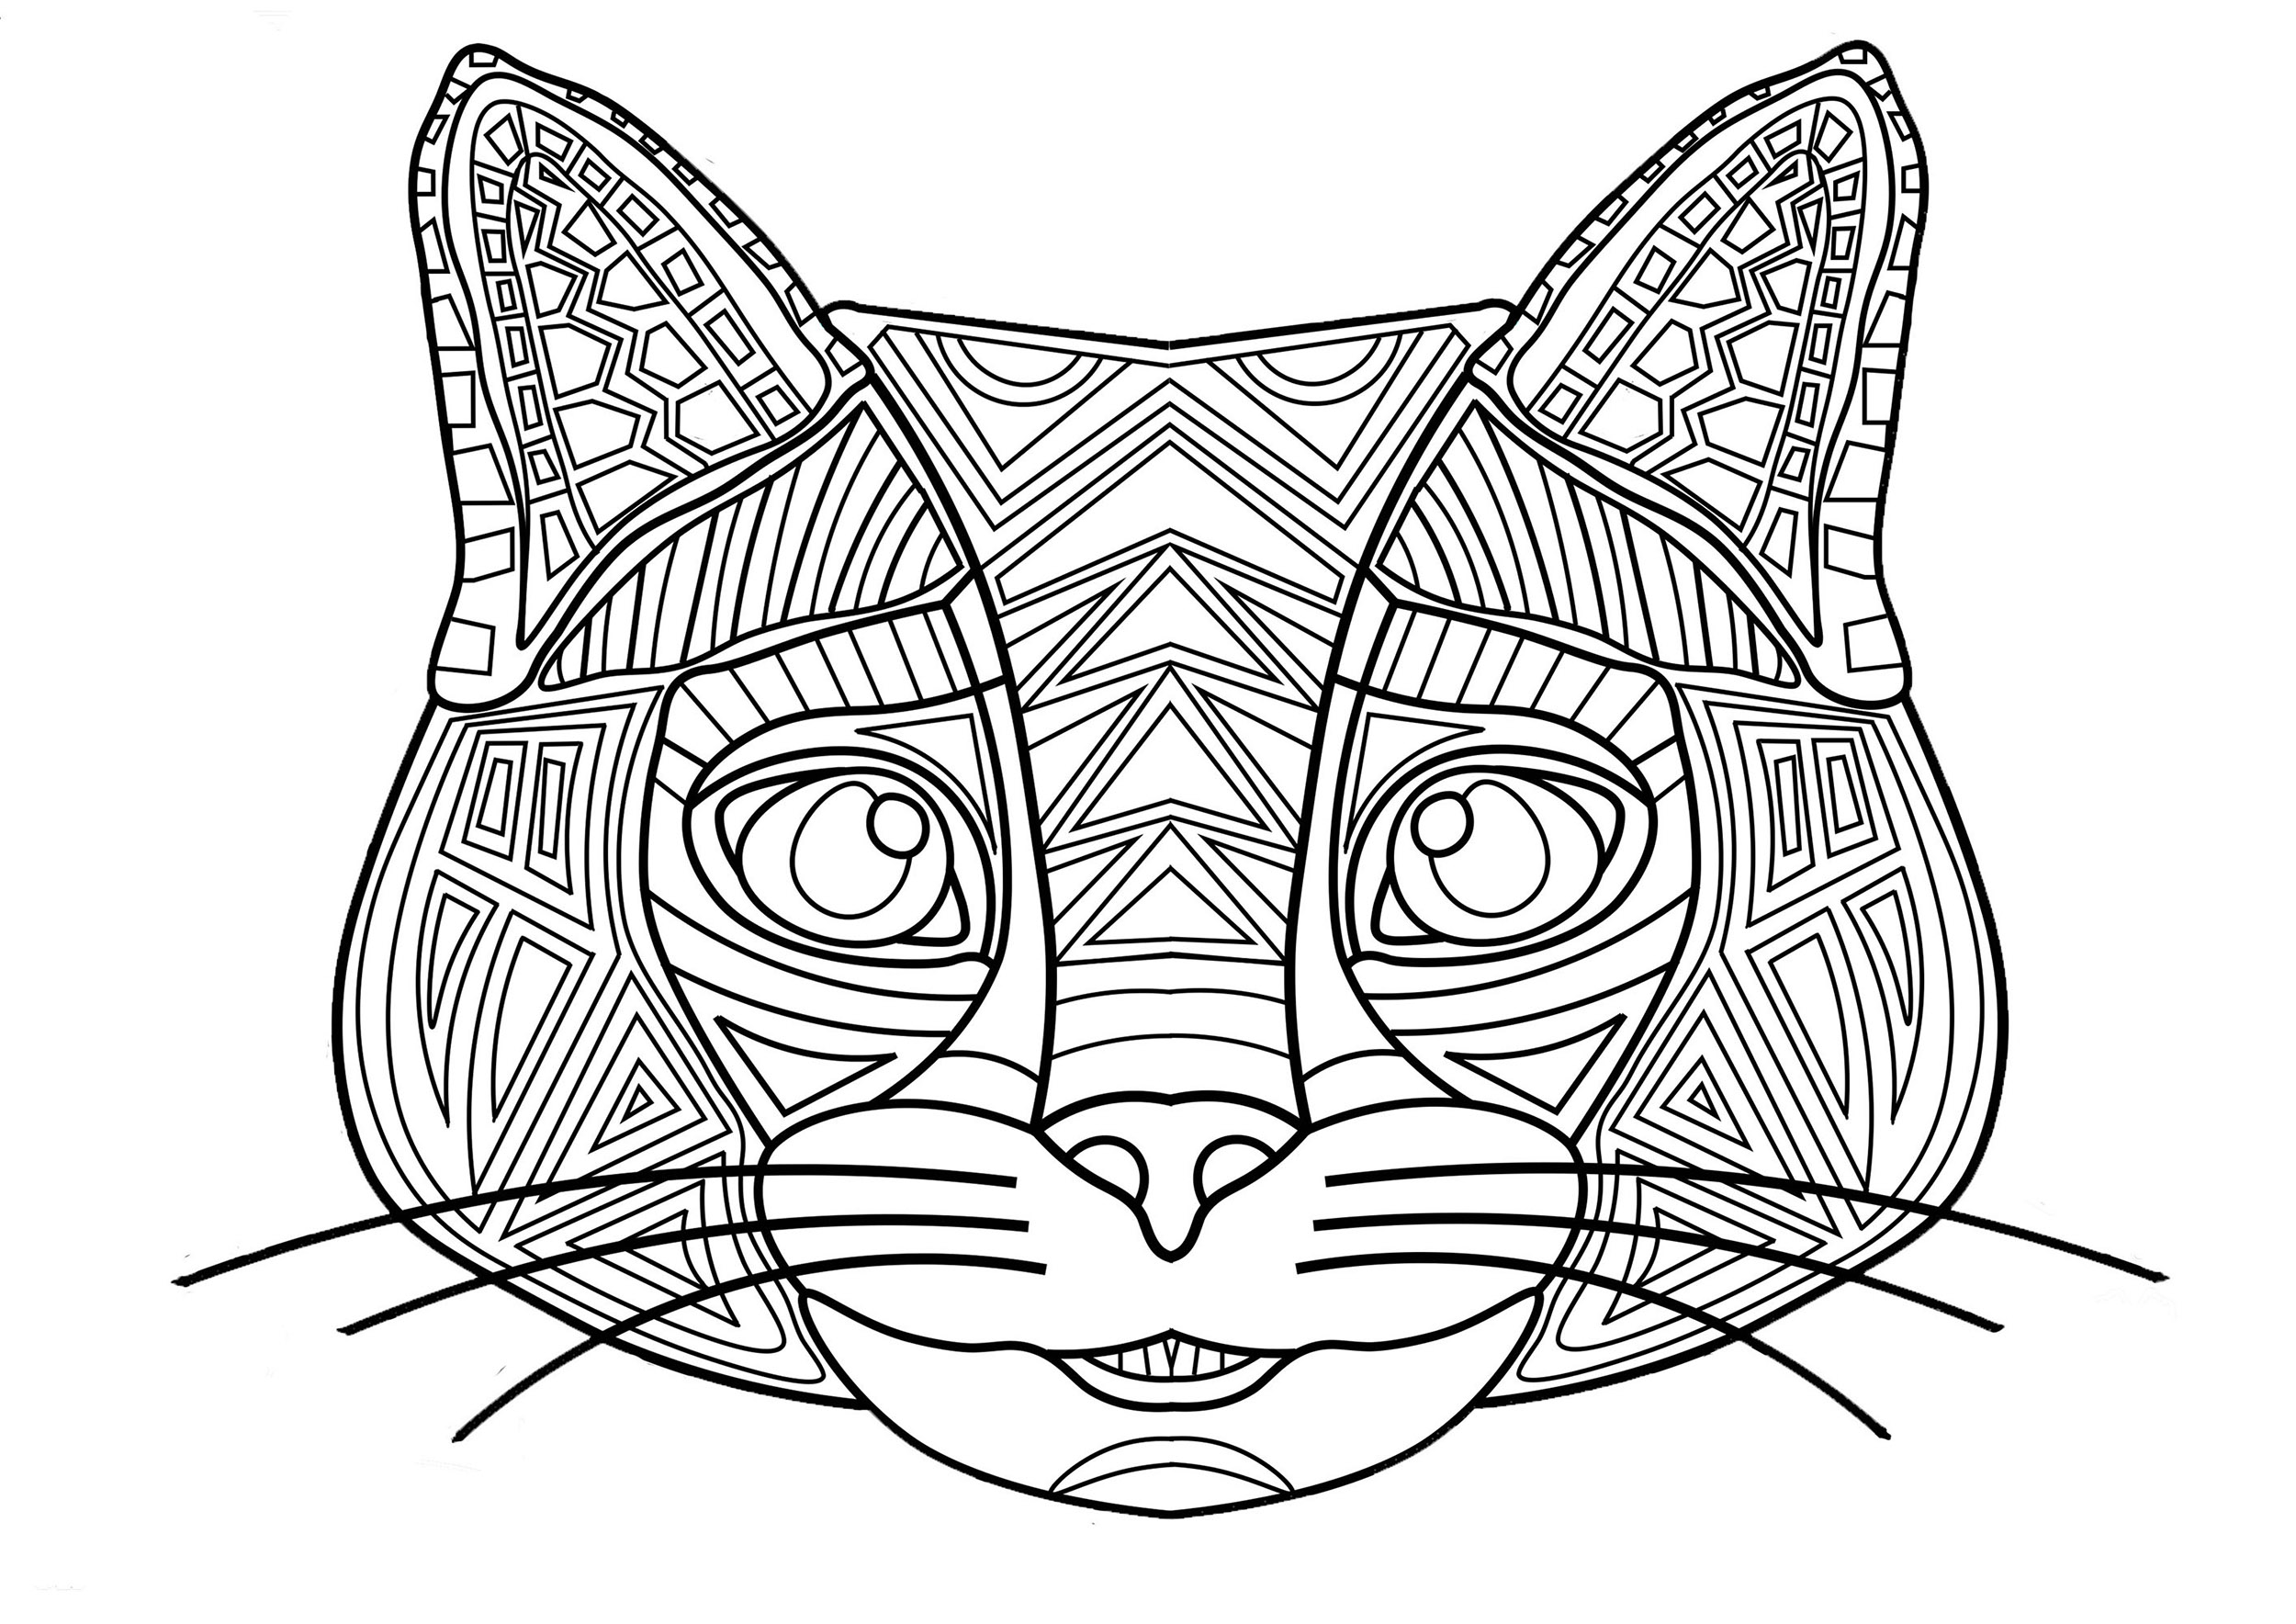 Cat head to color with simple patterns